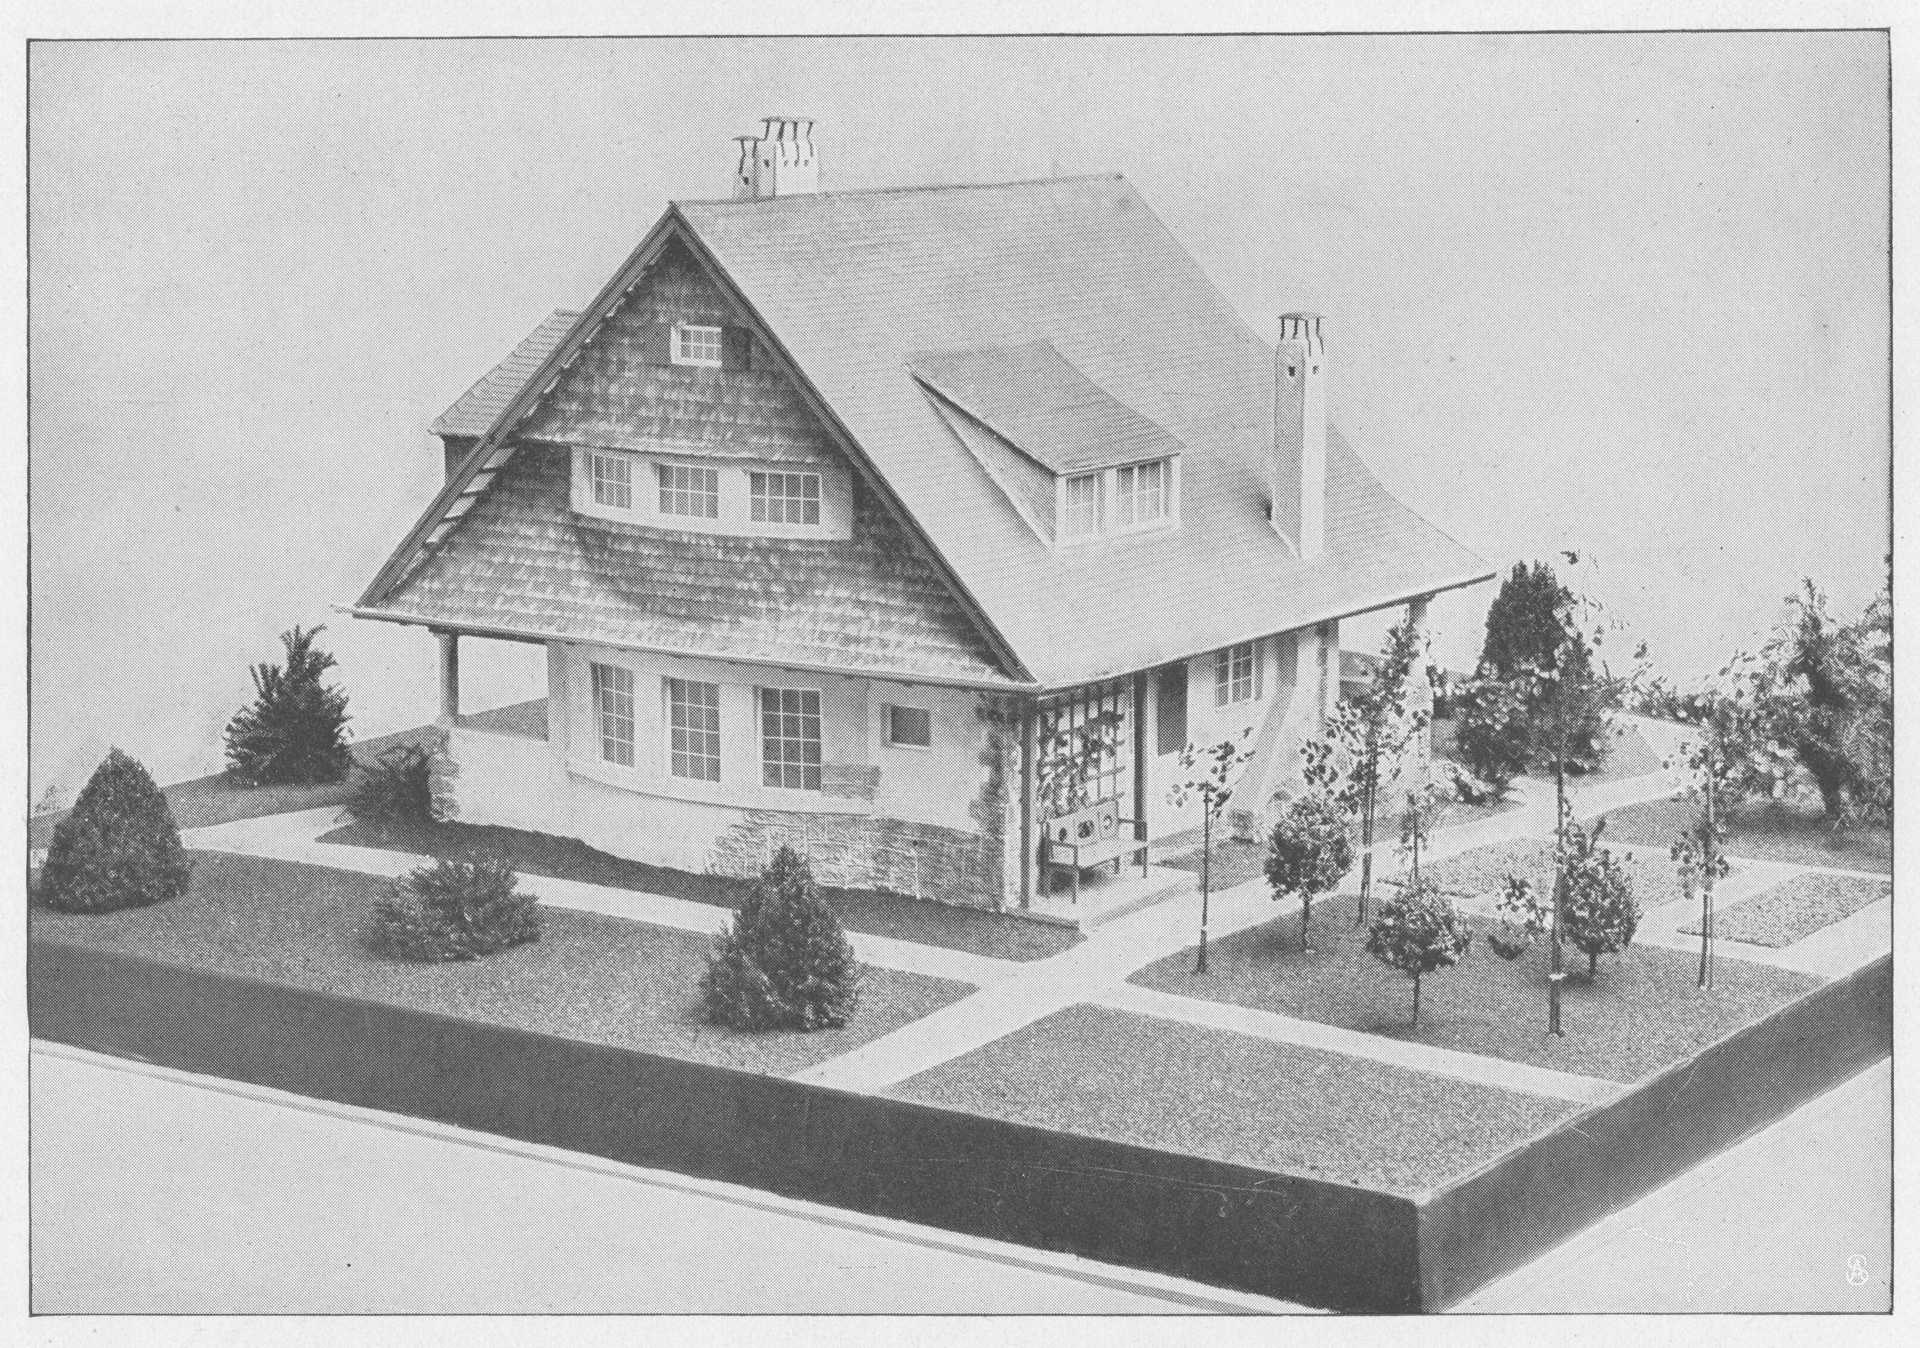 Model "Home A Dream on Lake Constance" around 1907